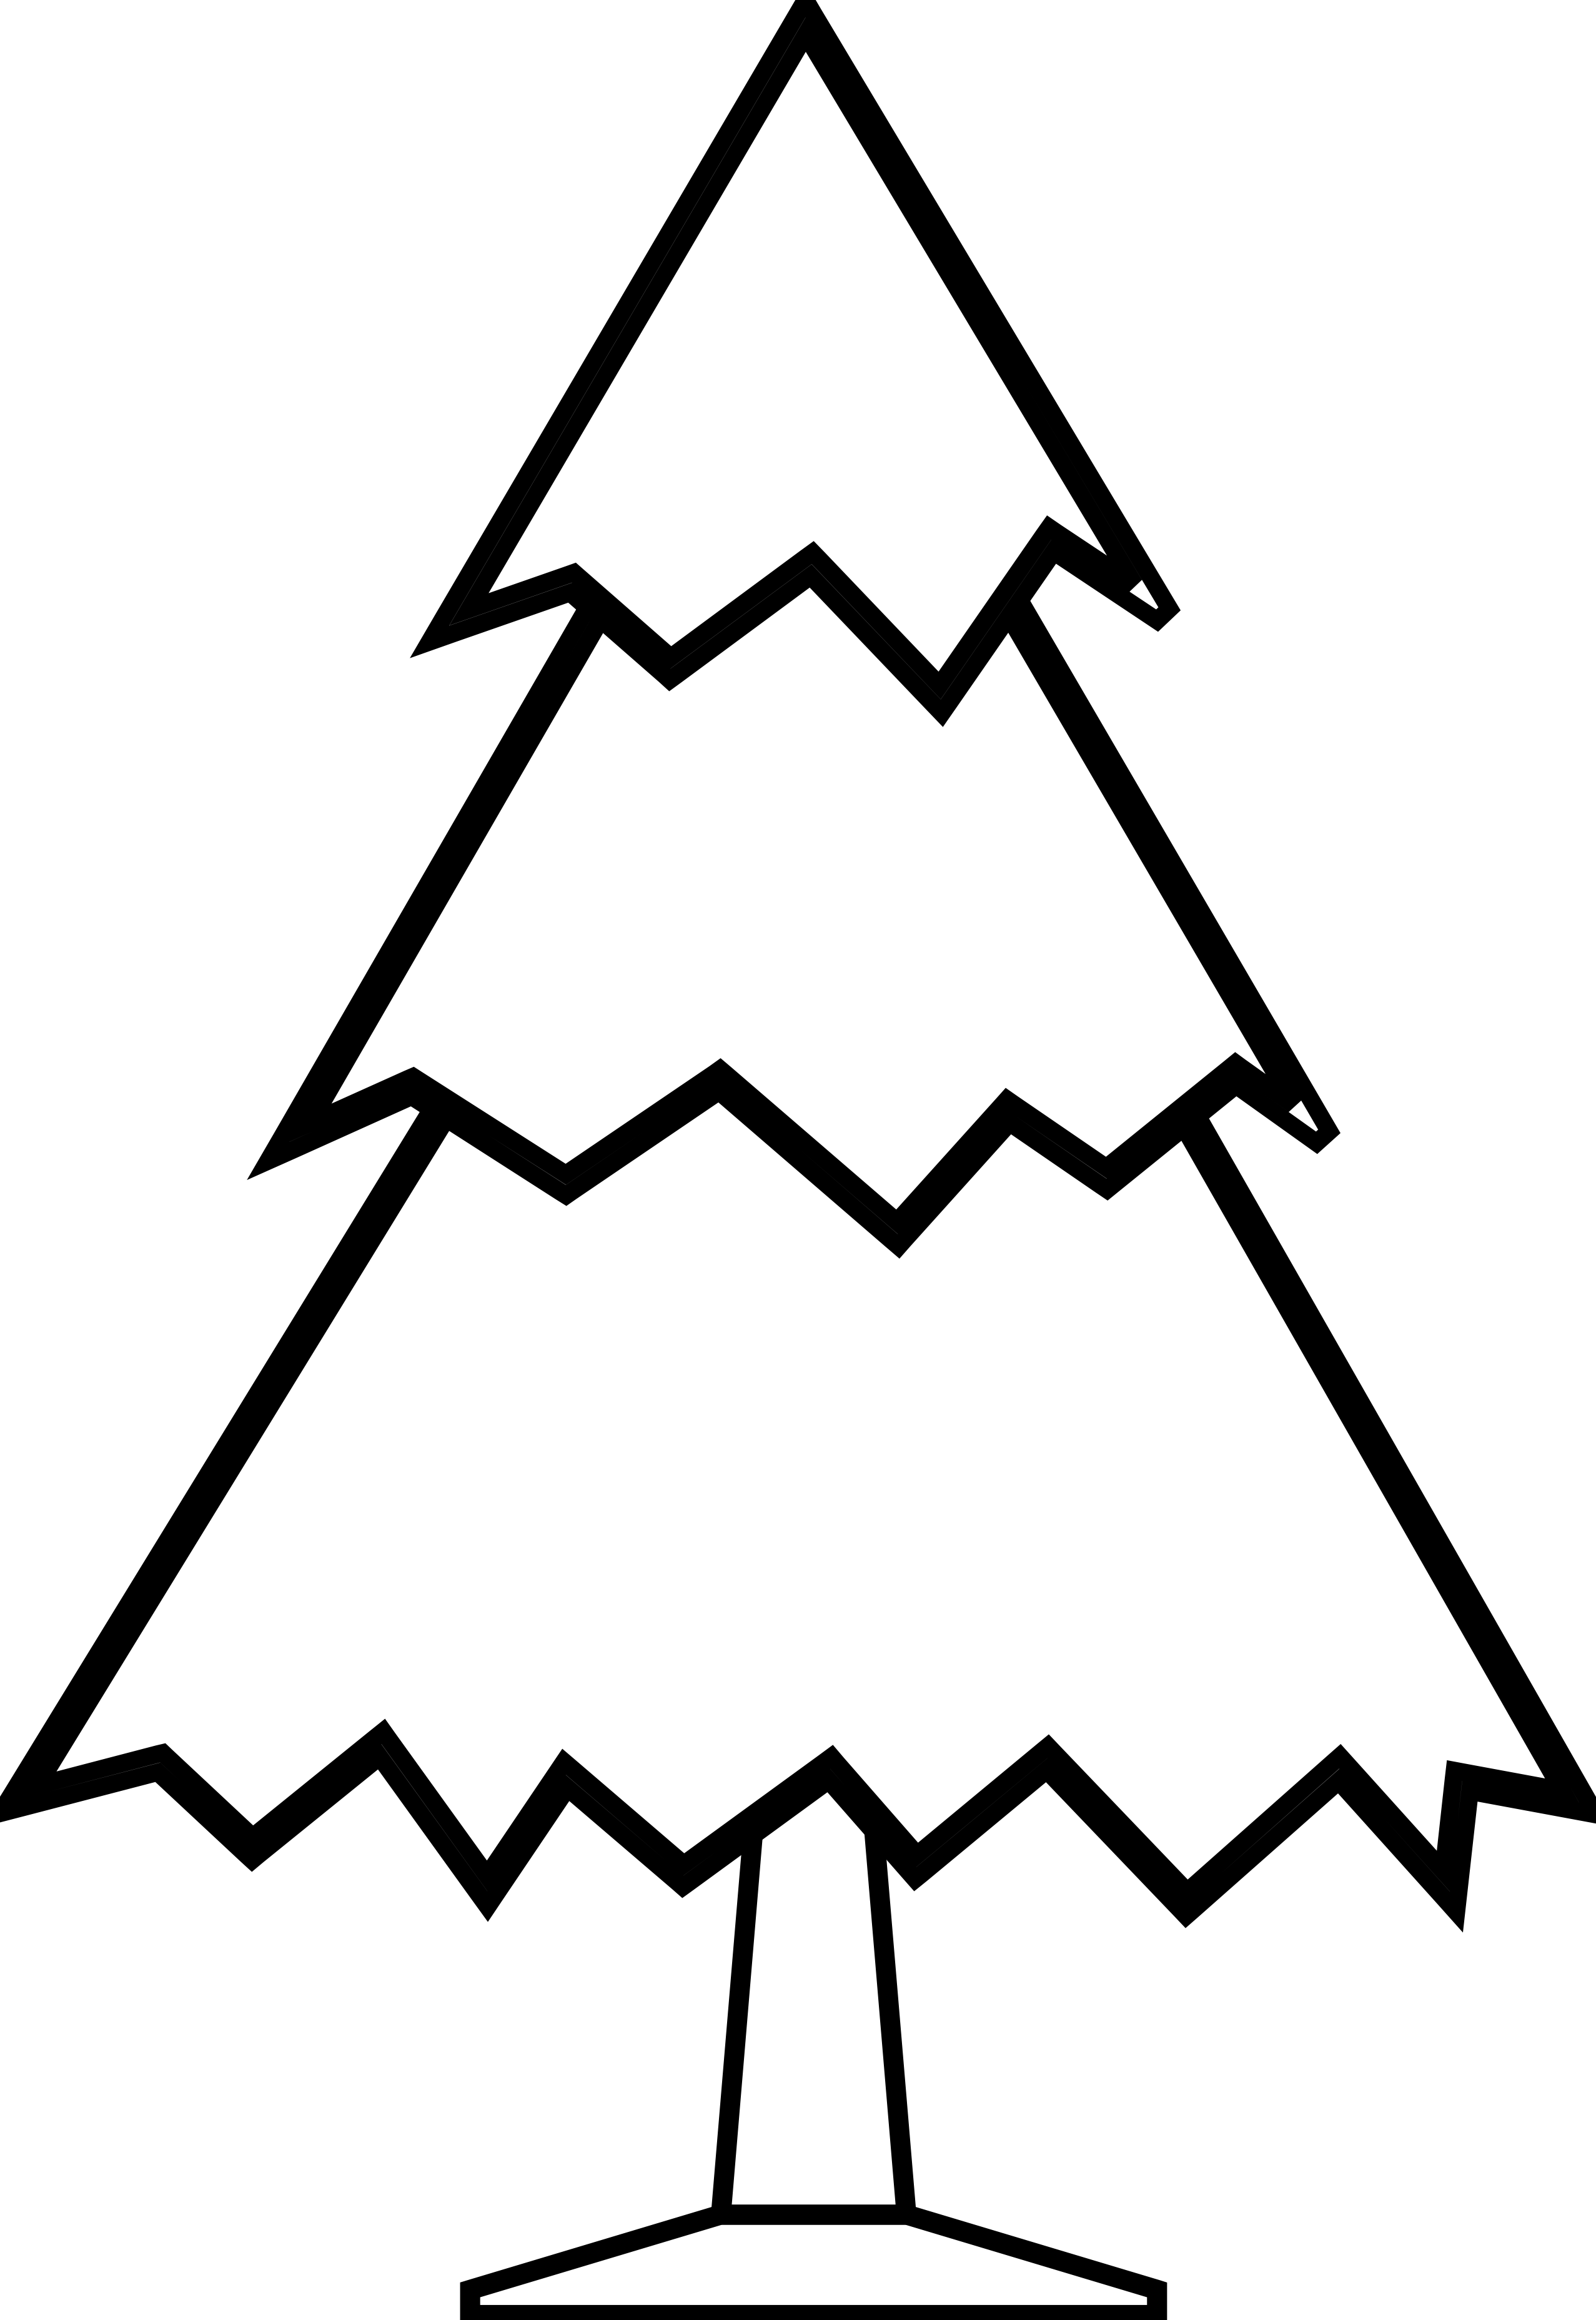 Christmas Tree Line Drawing - ClipArt Best